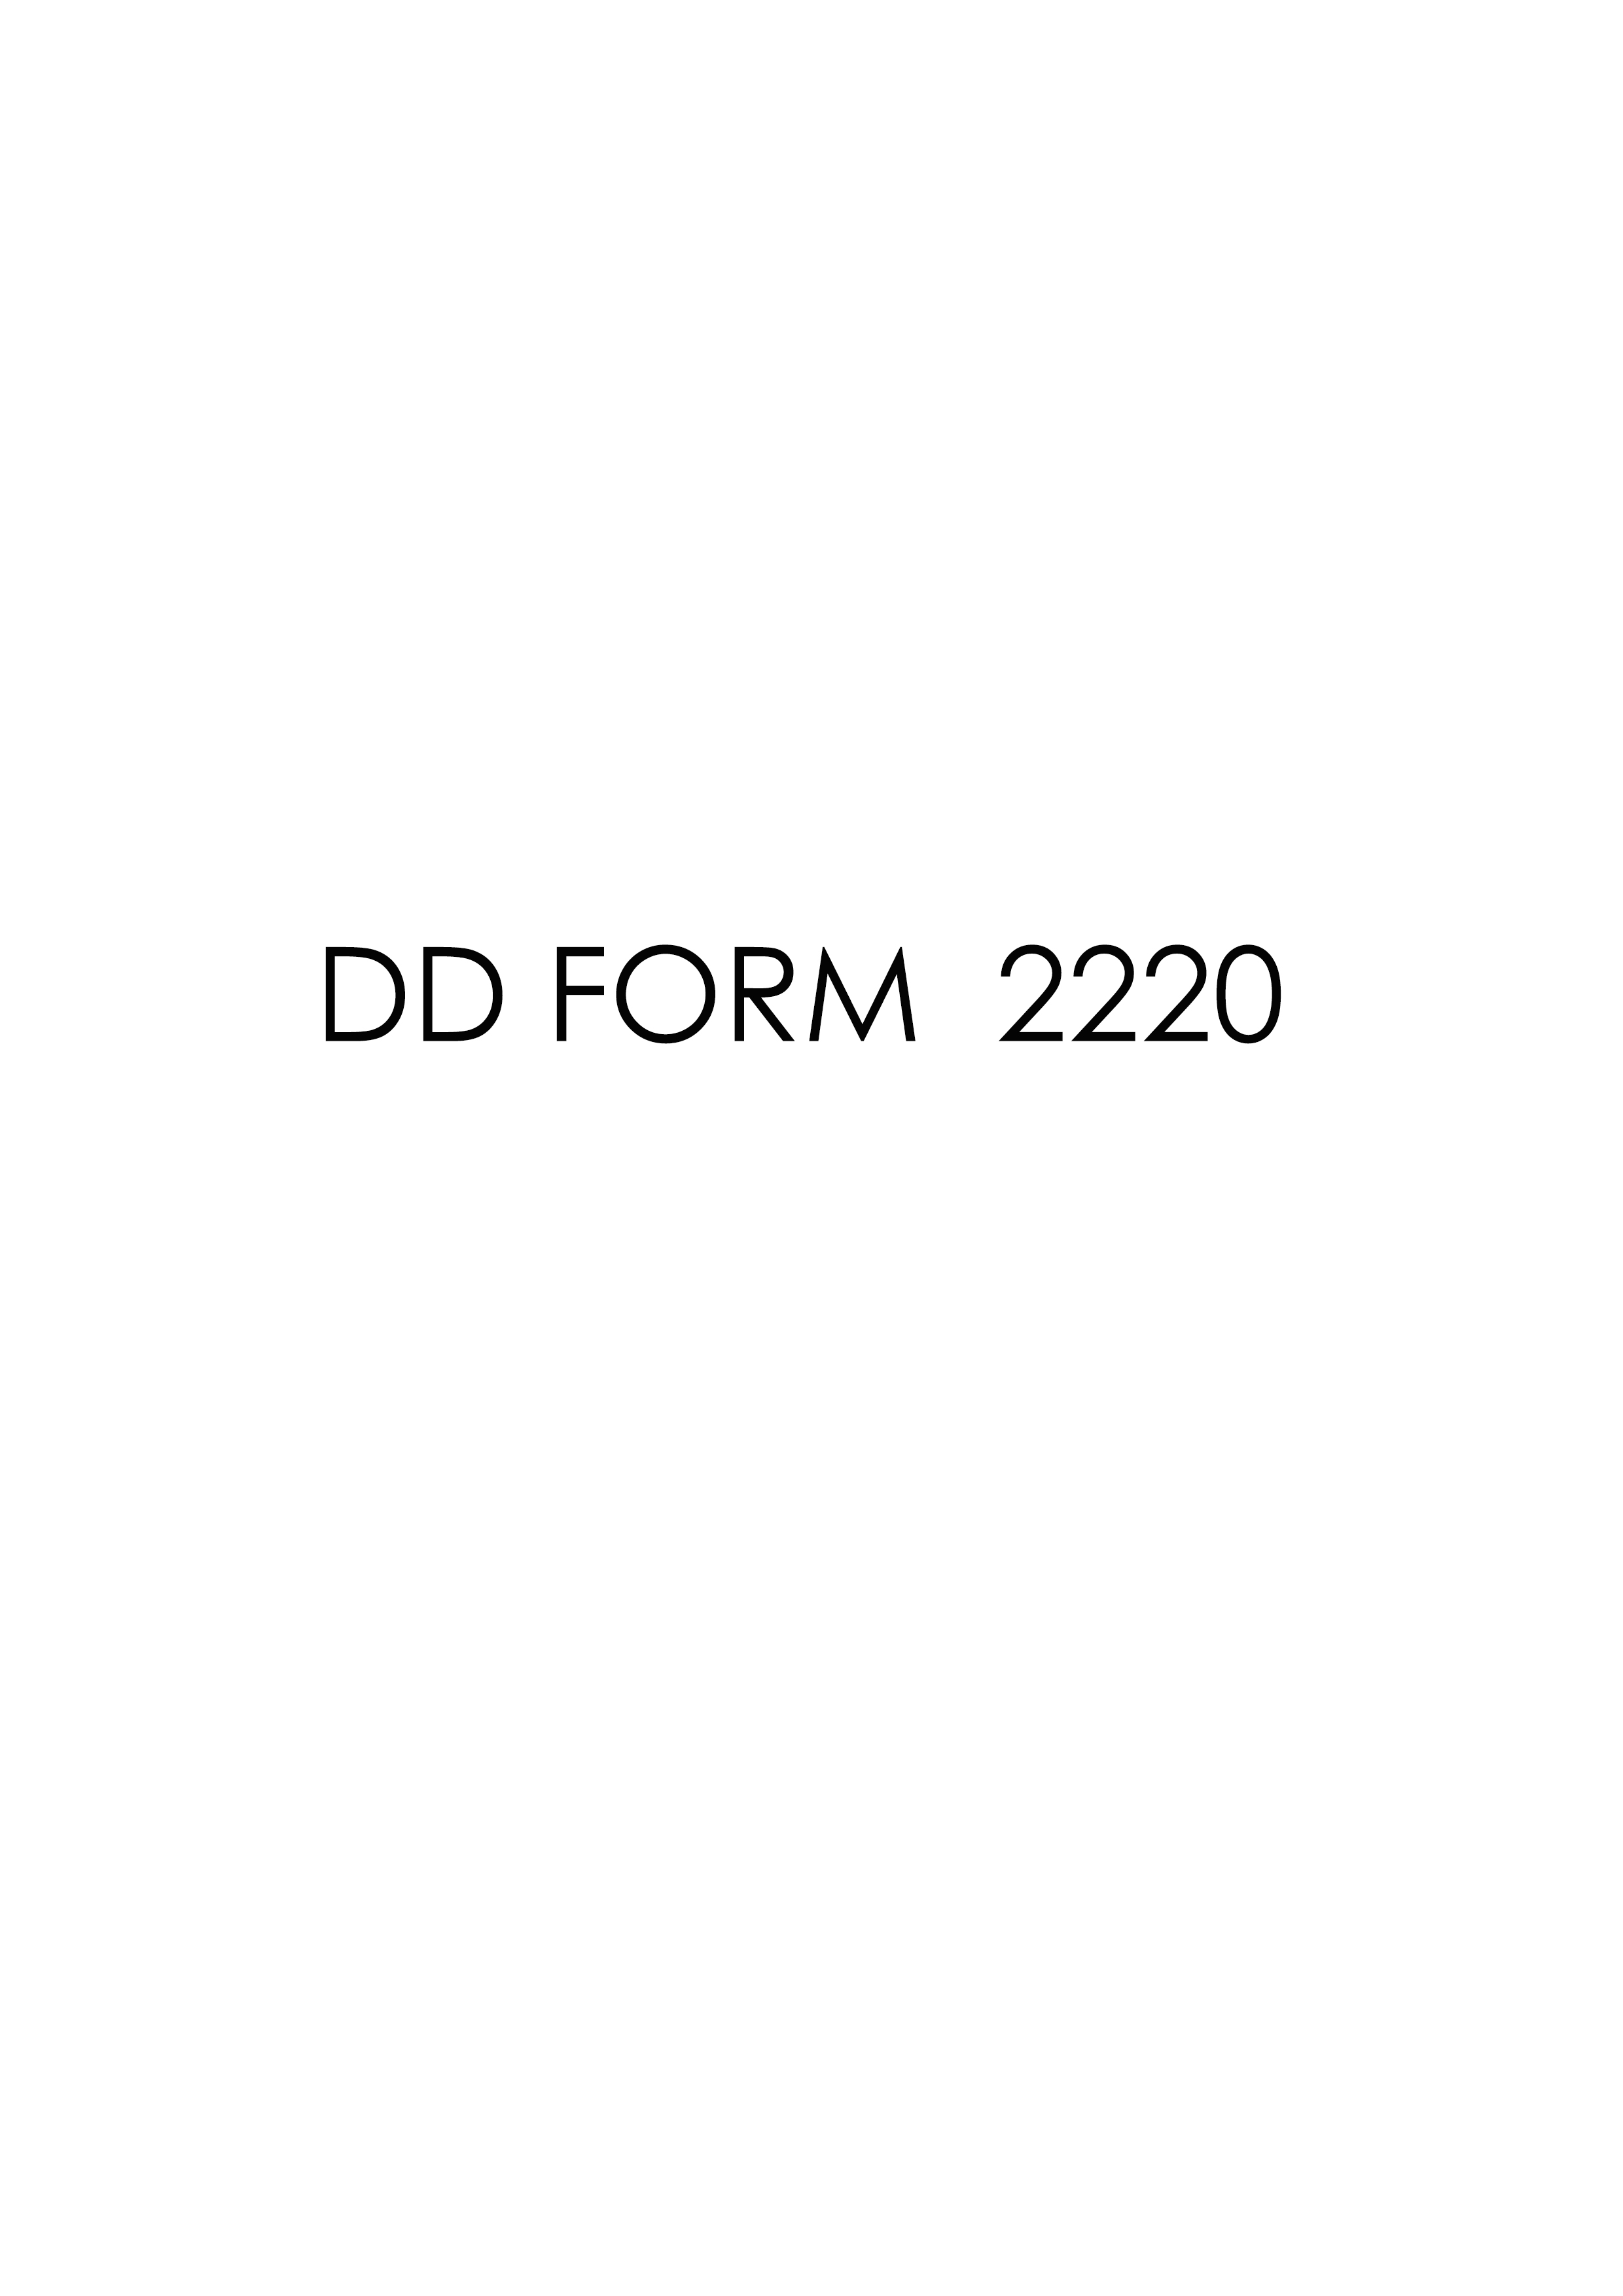 Download Fillable dd Form 2220